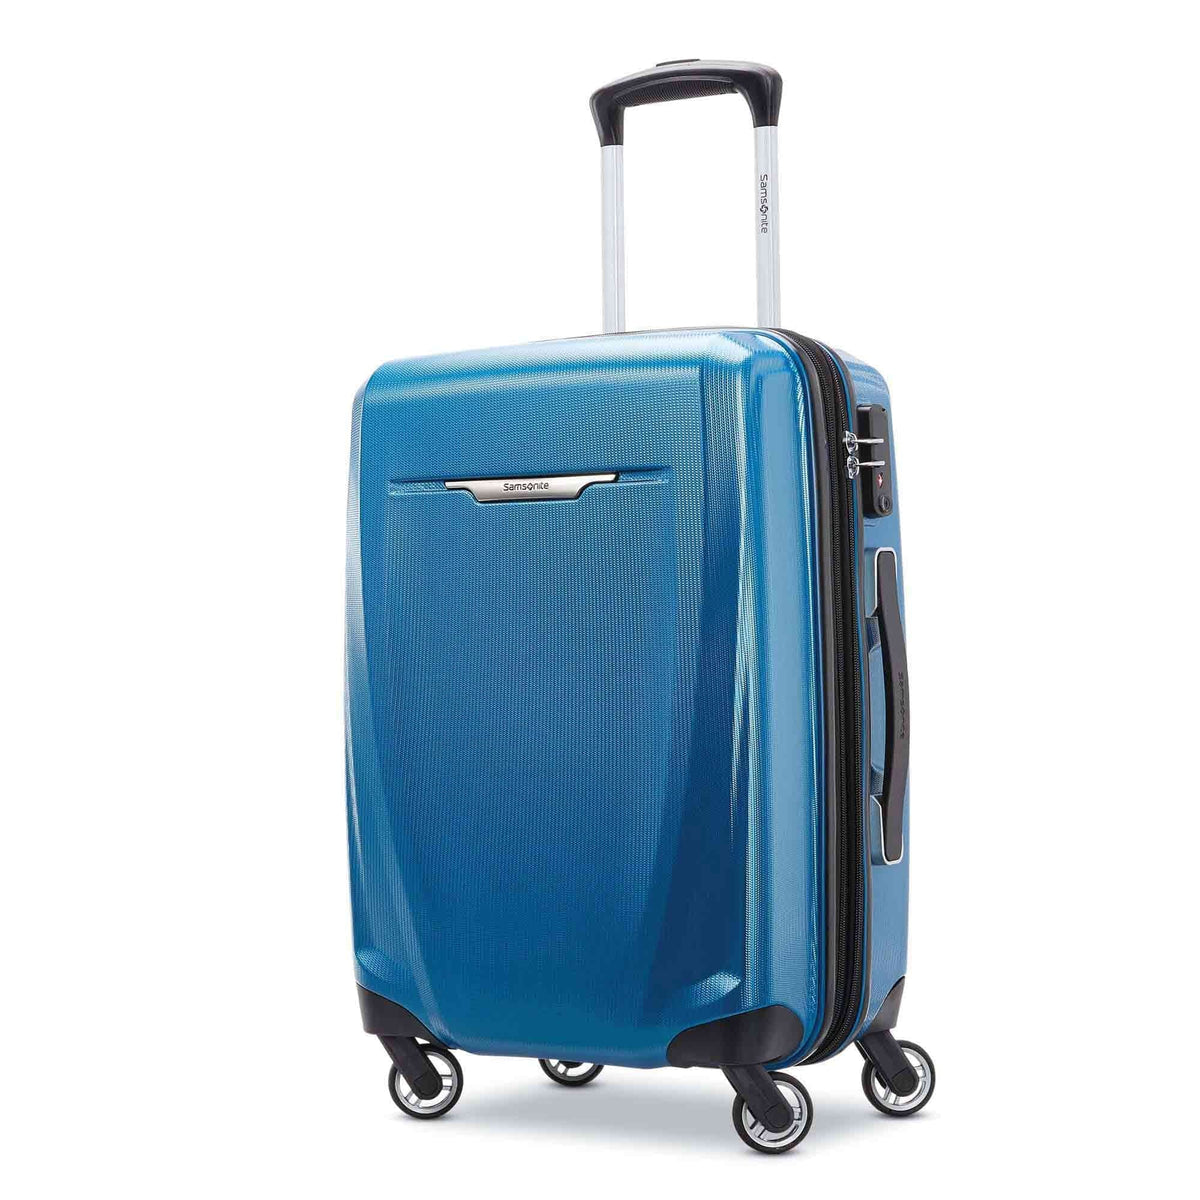 Samsonite 56"- 20" Winfield 3 Deluxe Carry-On Spinner Luggage